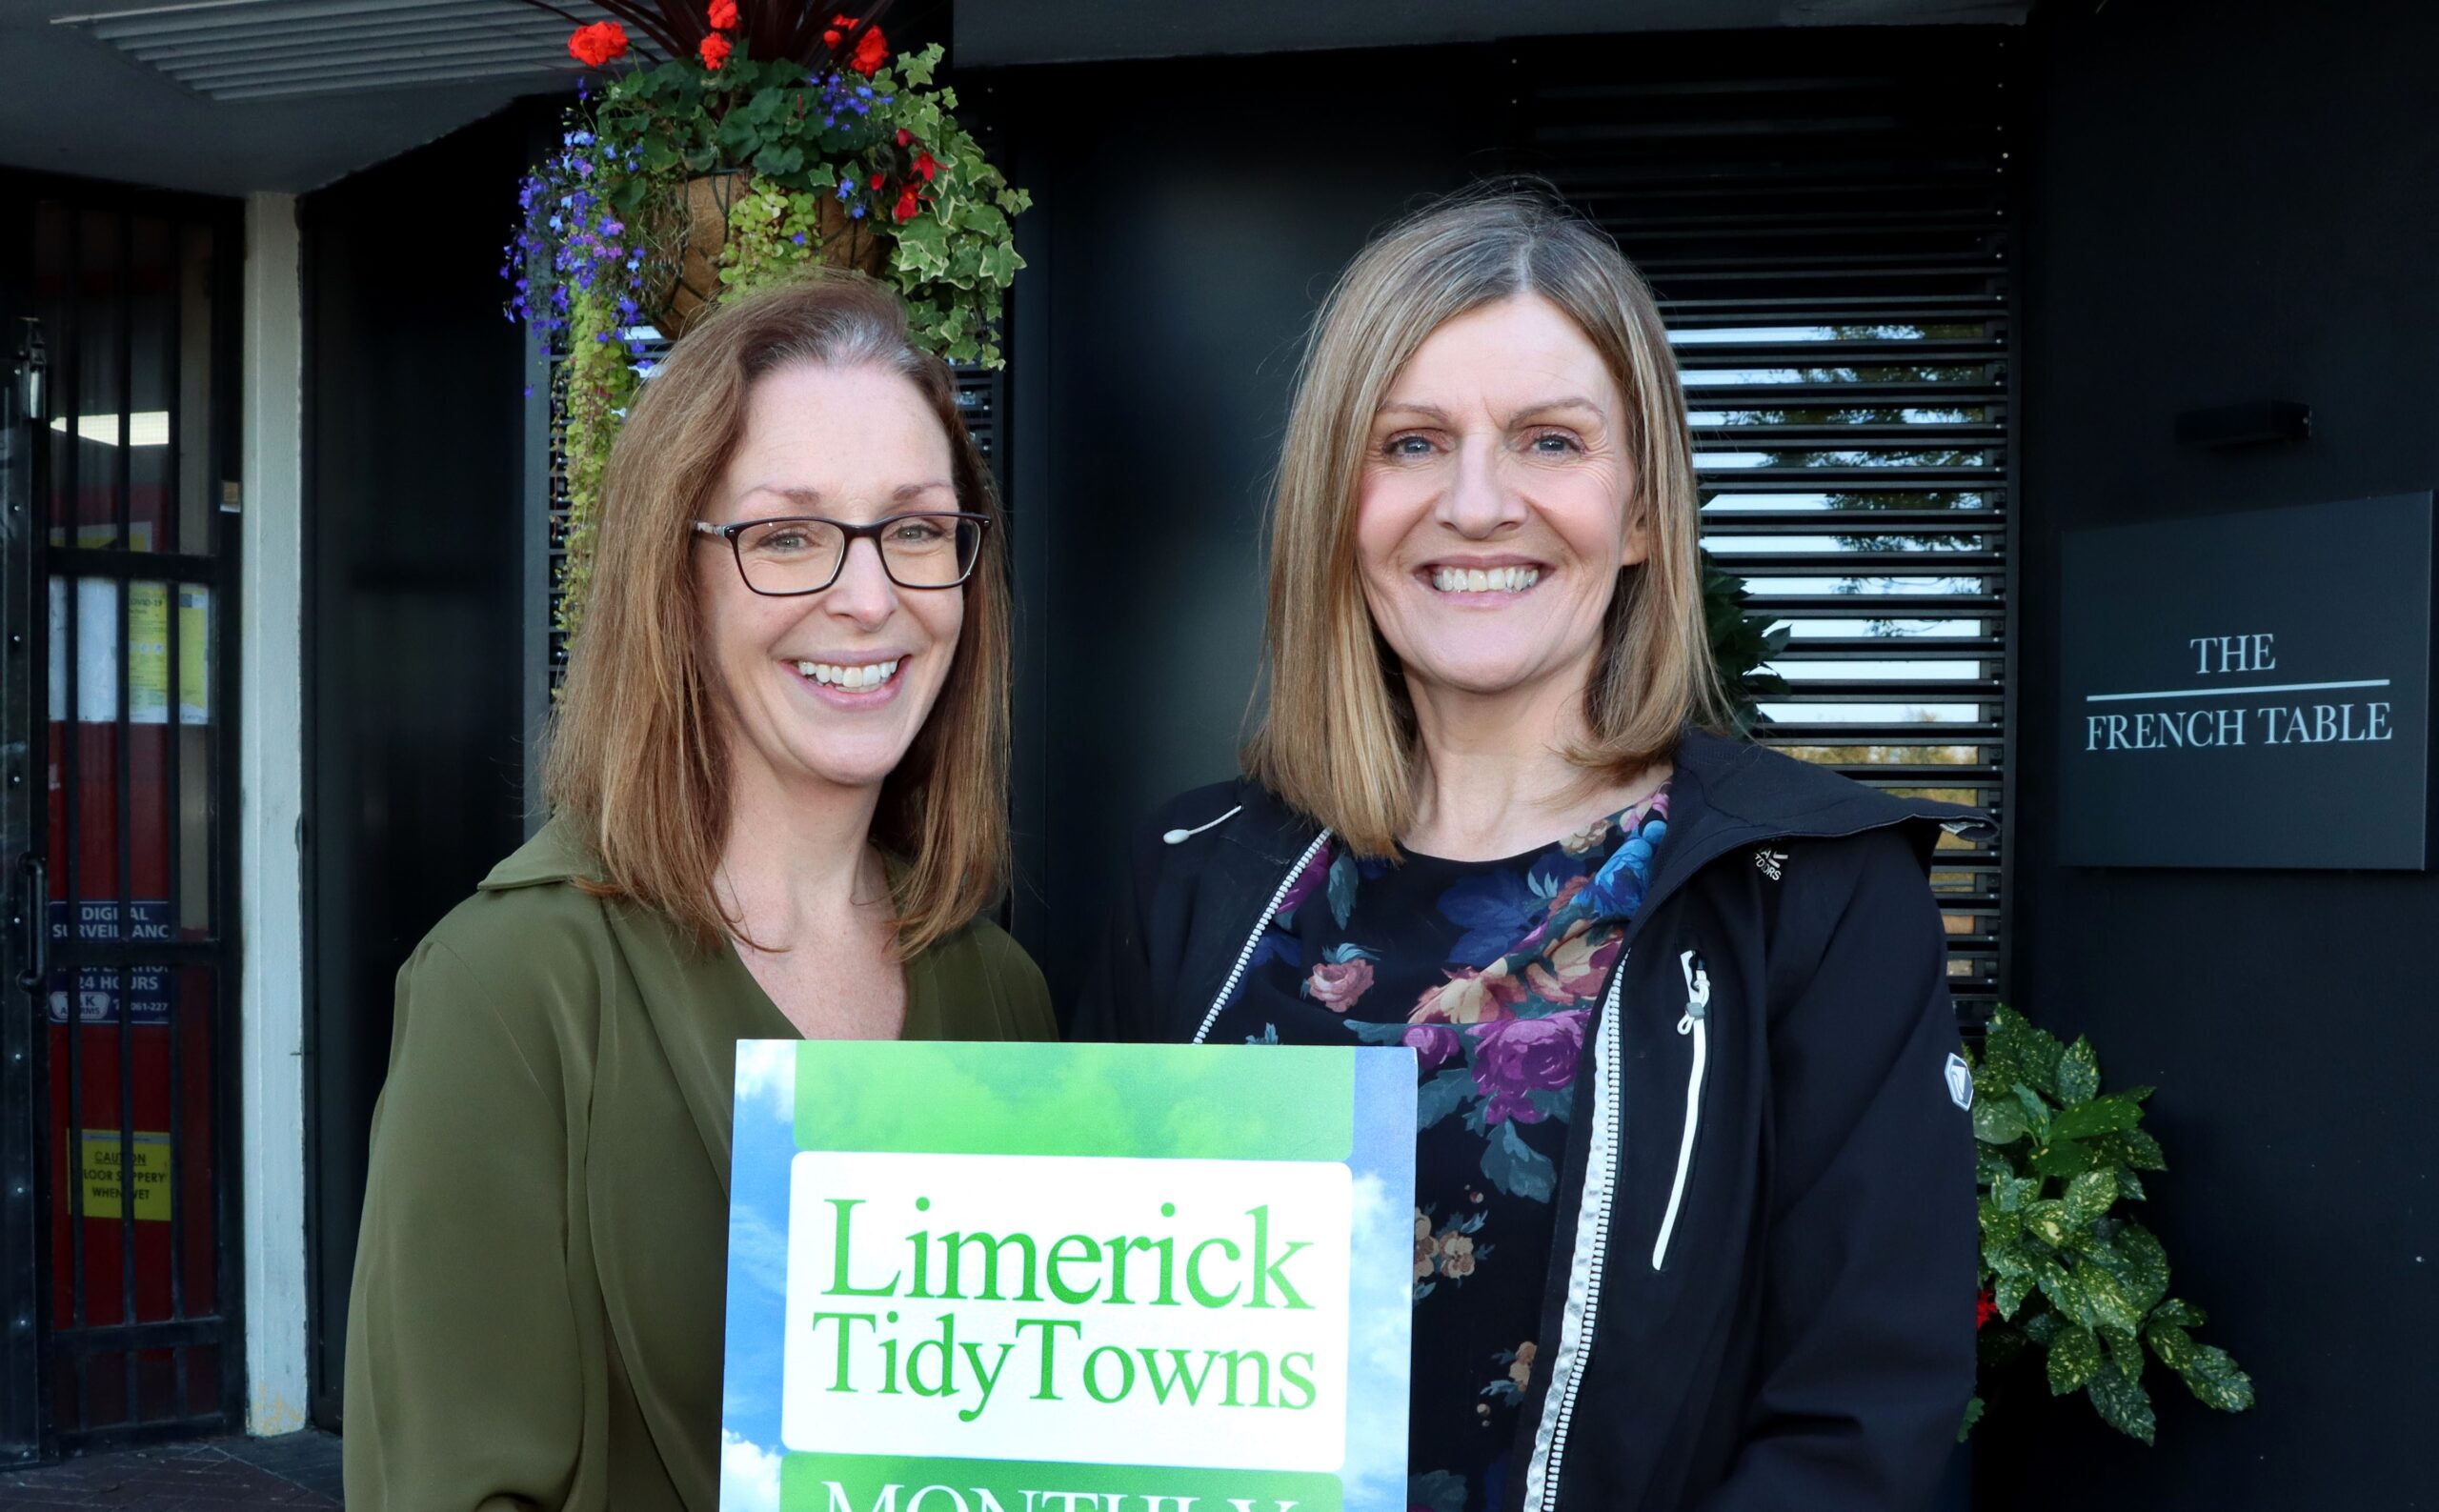 The French Table win Limerick City Tidy Towns Bi-Monthly Award for September-October 2023